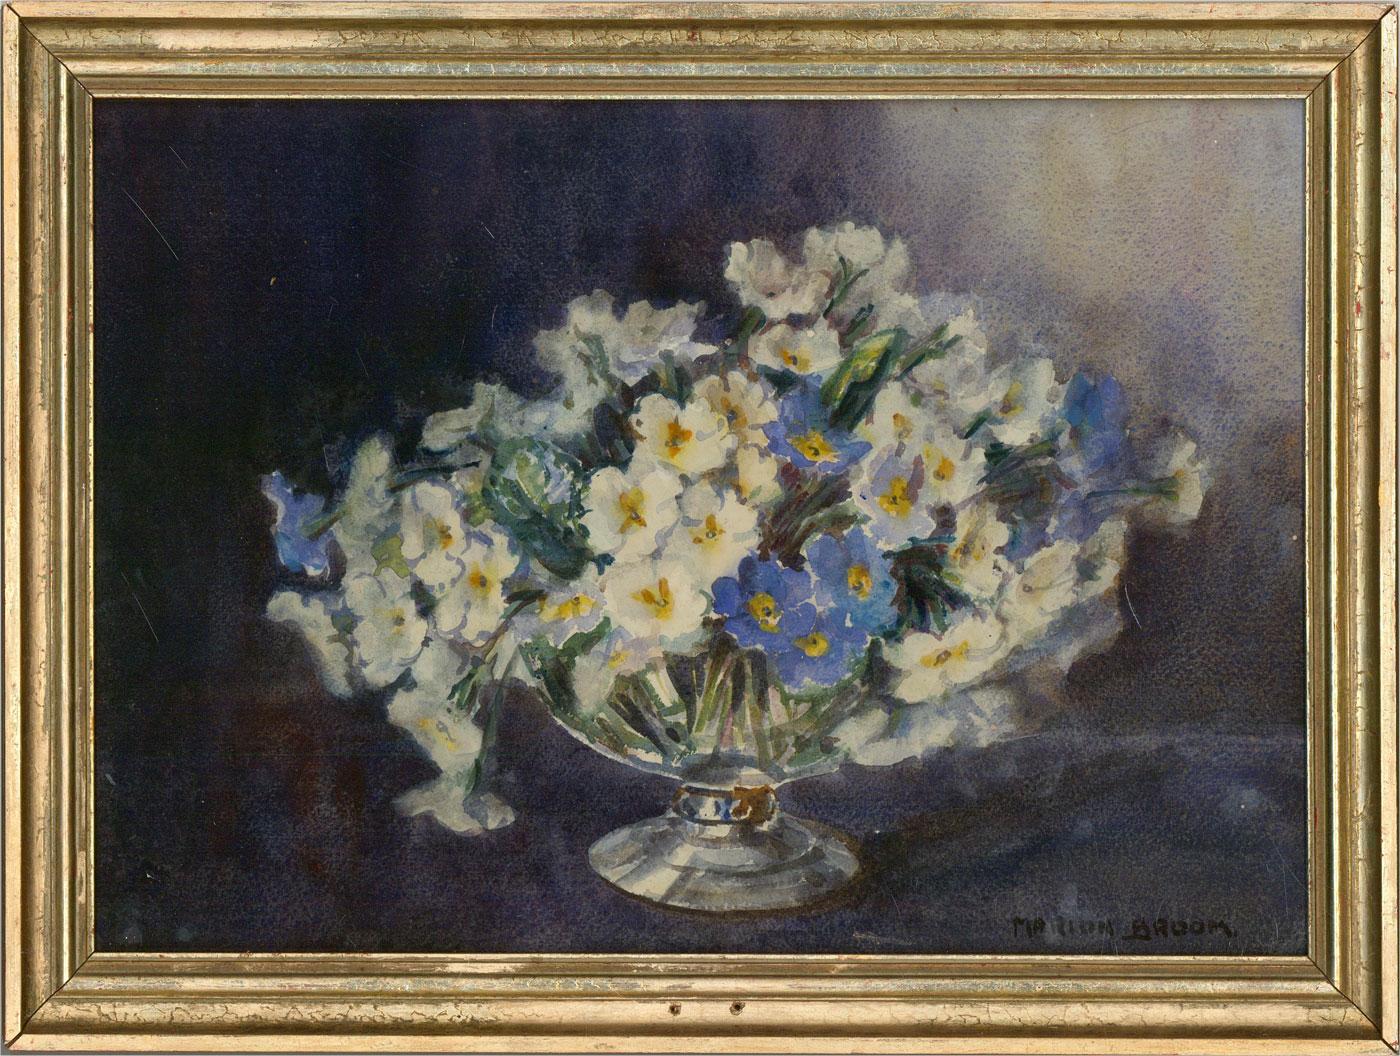 Marion Broom RWS (1878-1962) - Early 20th Century Watercolour, Vase of Flowers 2